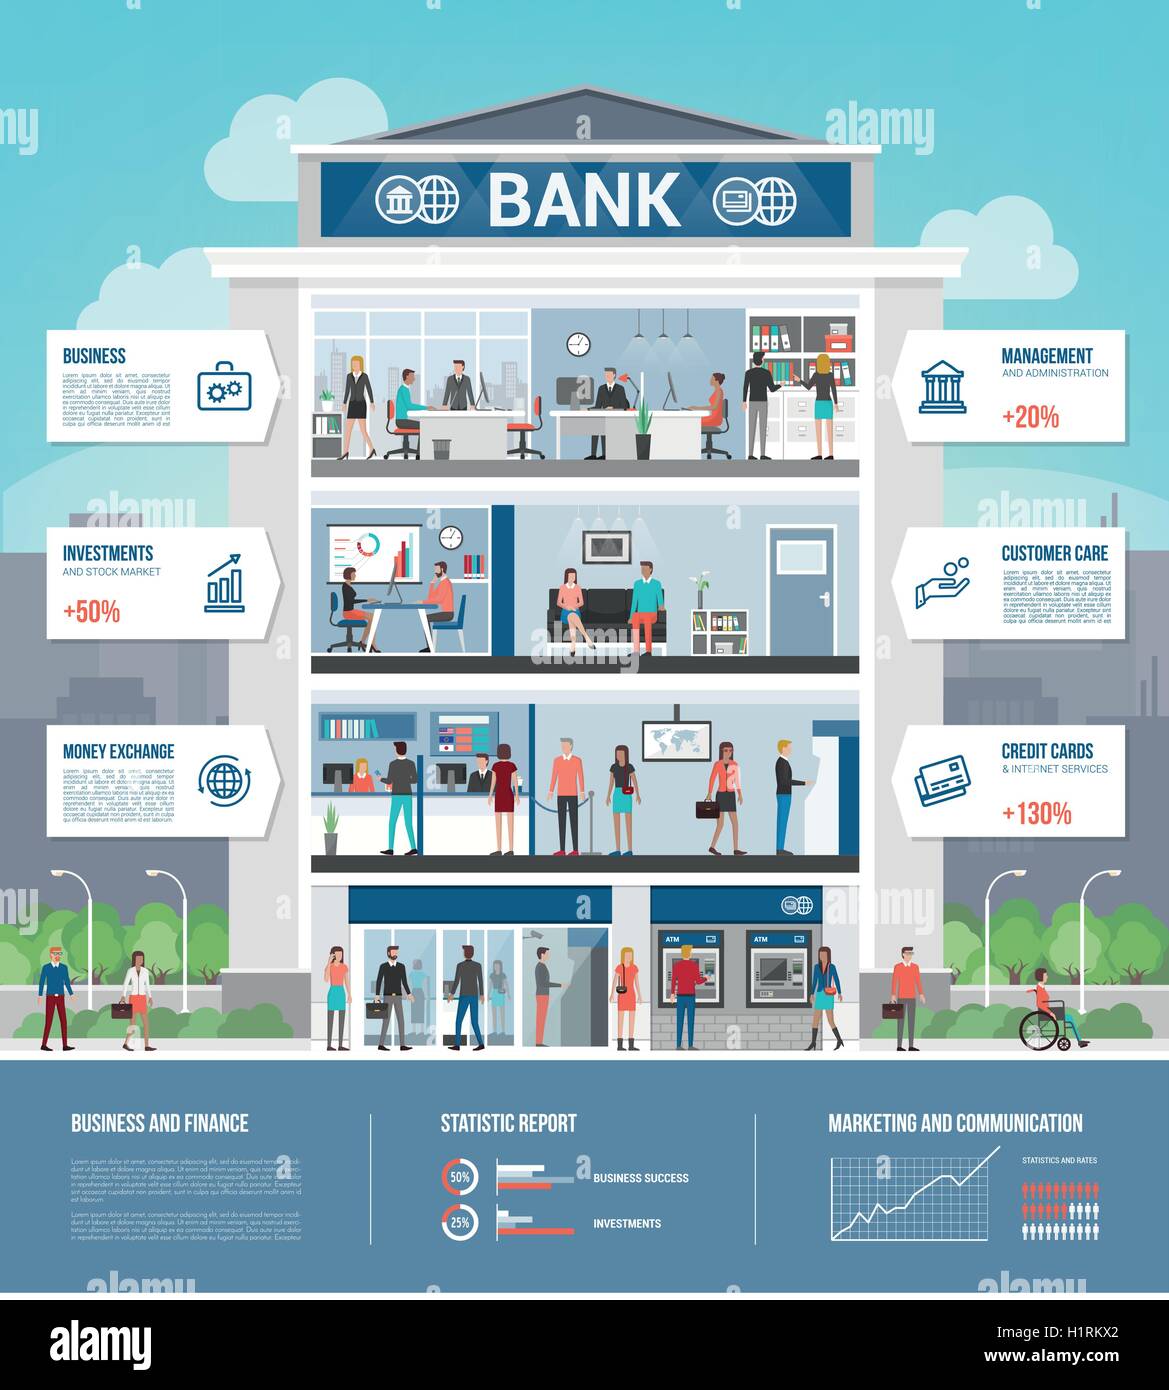 Bank building and finance infographic with interiors, text, icons set and people working Stock Vector